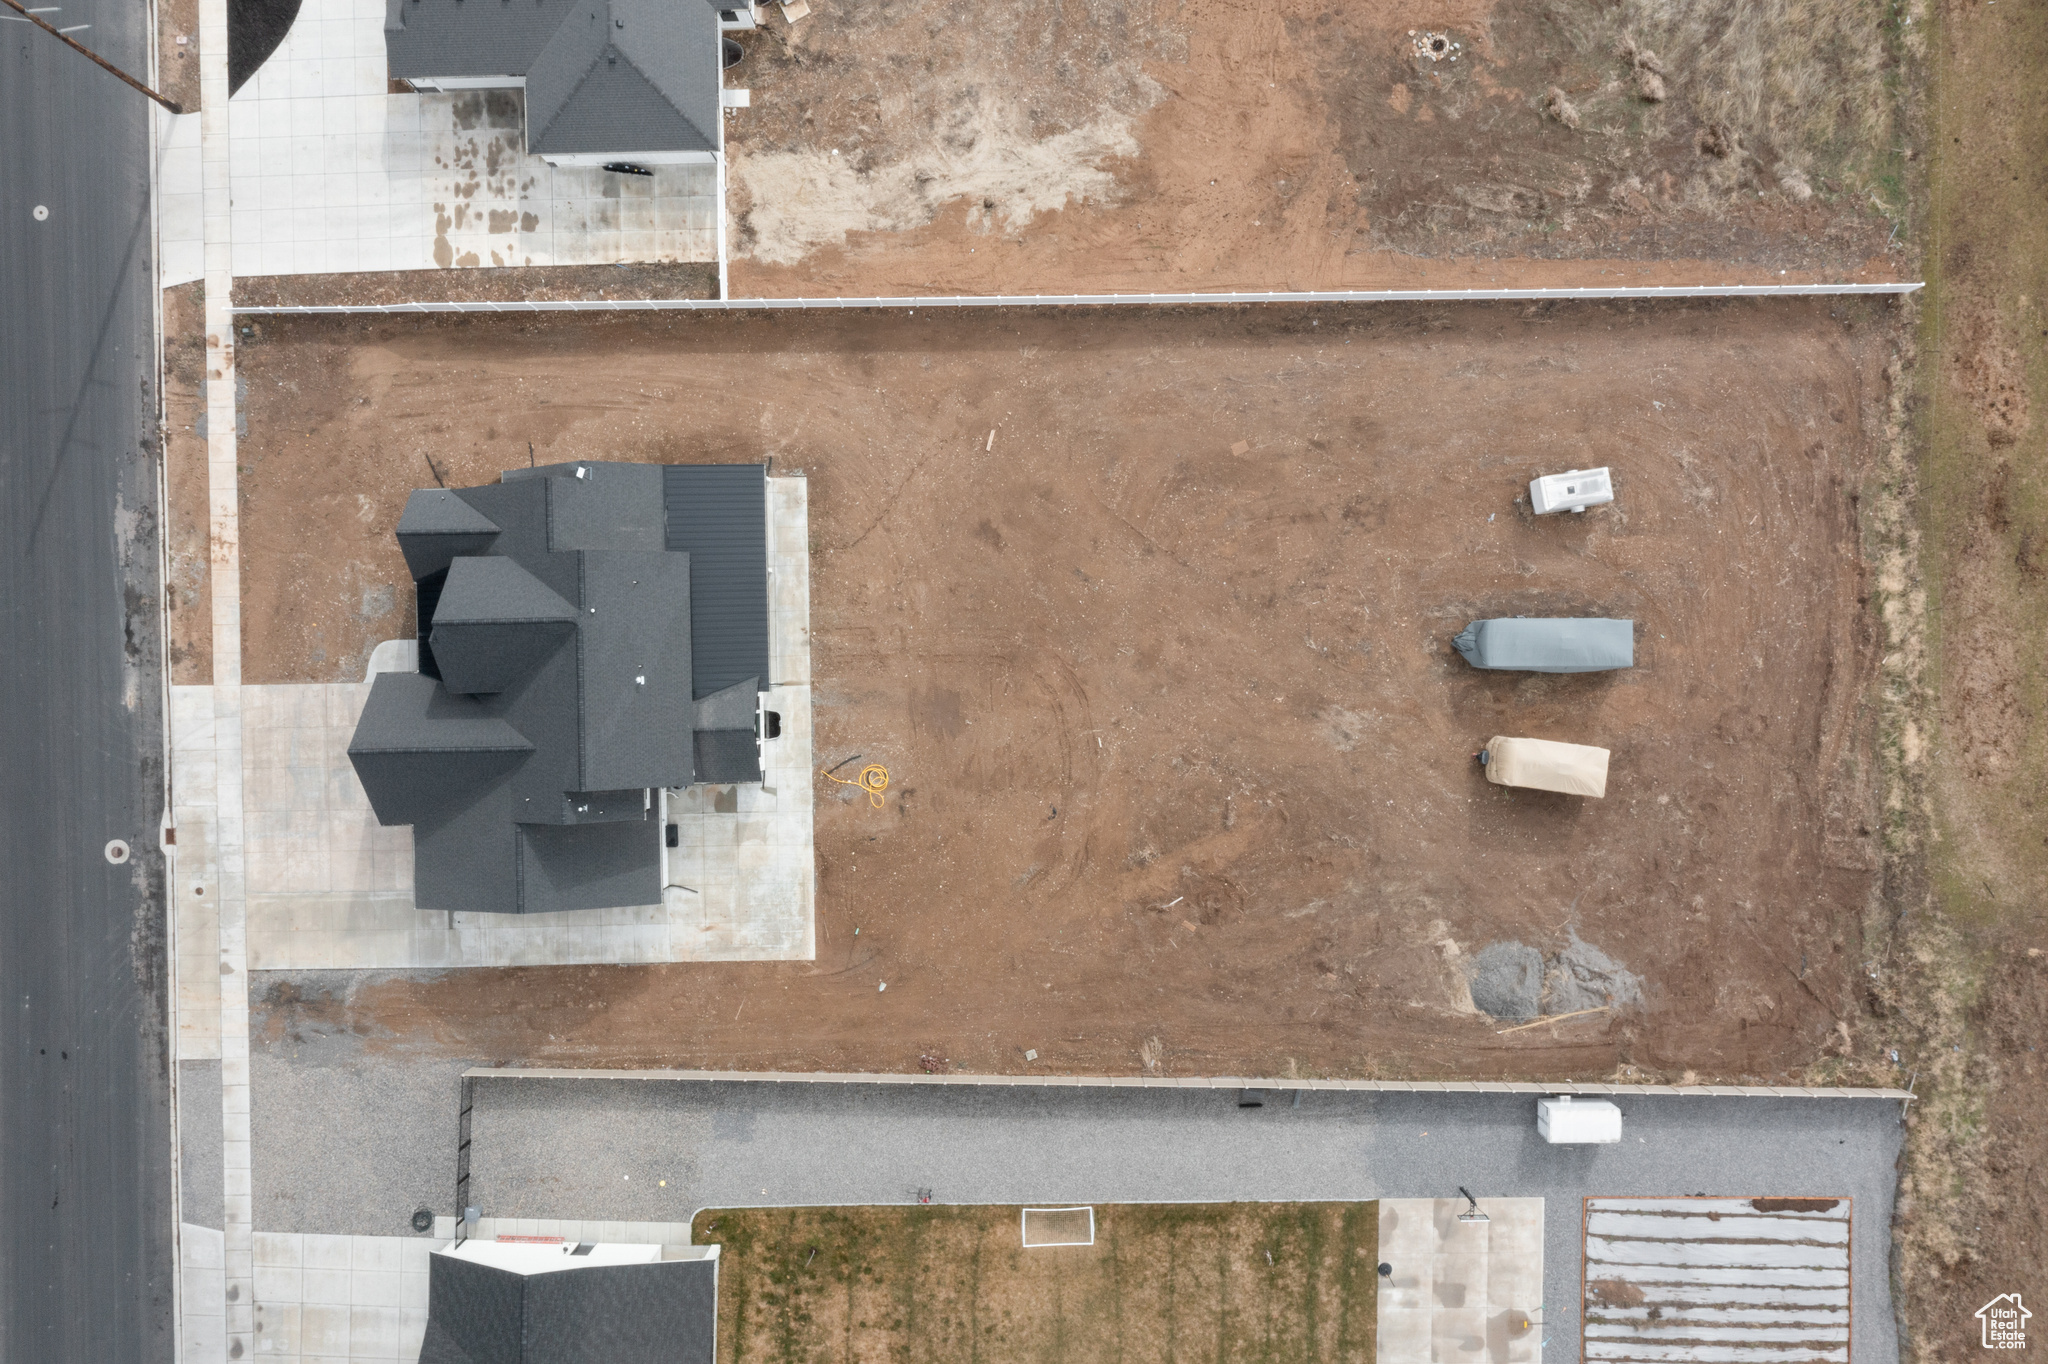 Aerial view of house on lot